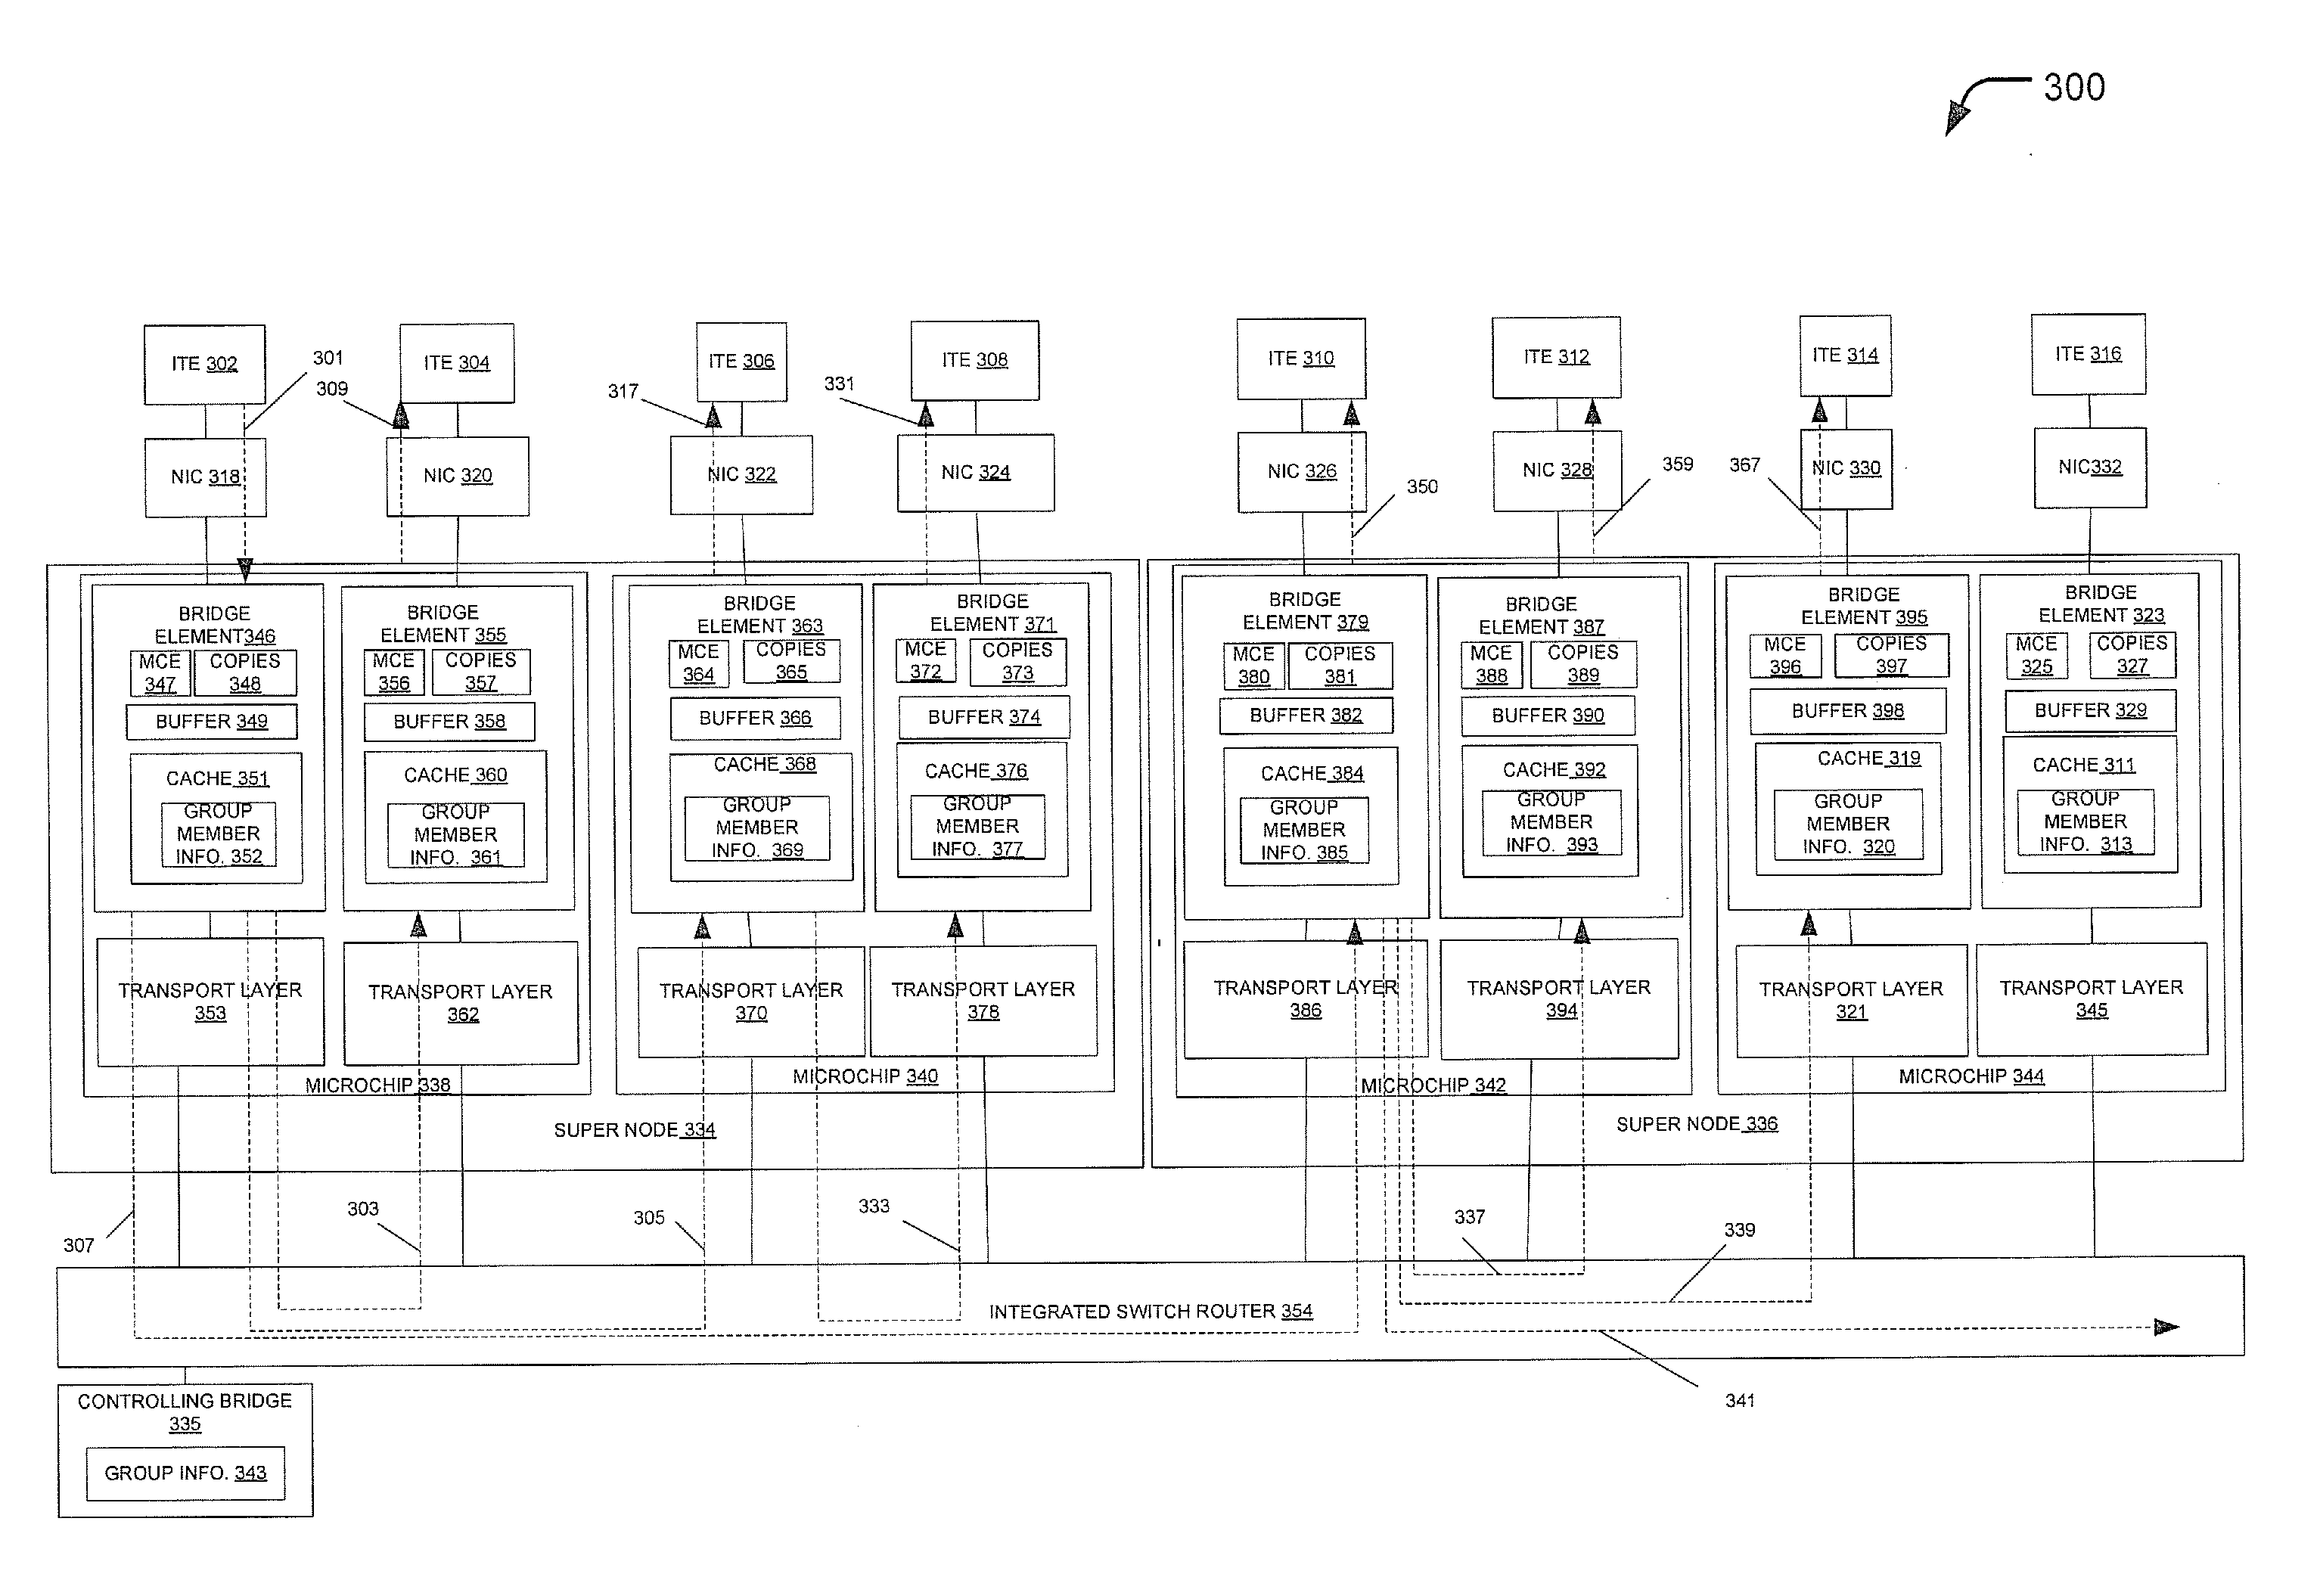 Multicasting using a multitiered distributed virtual bridge hierarchy